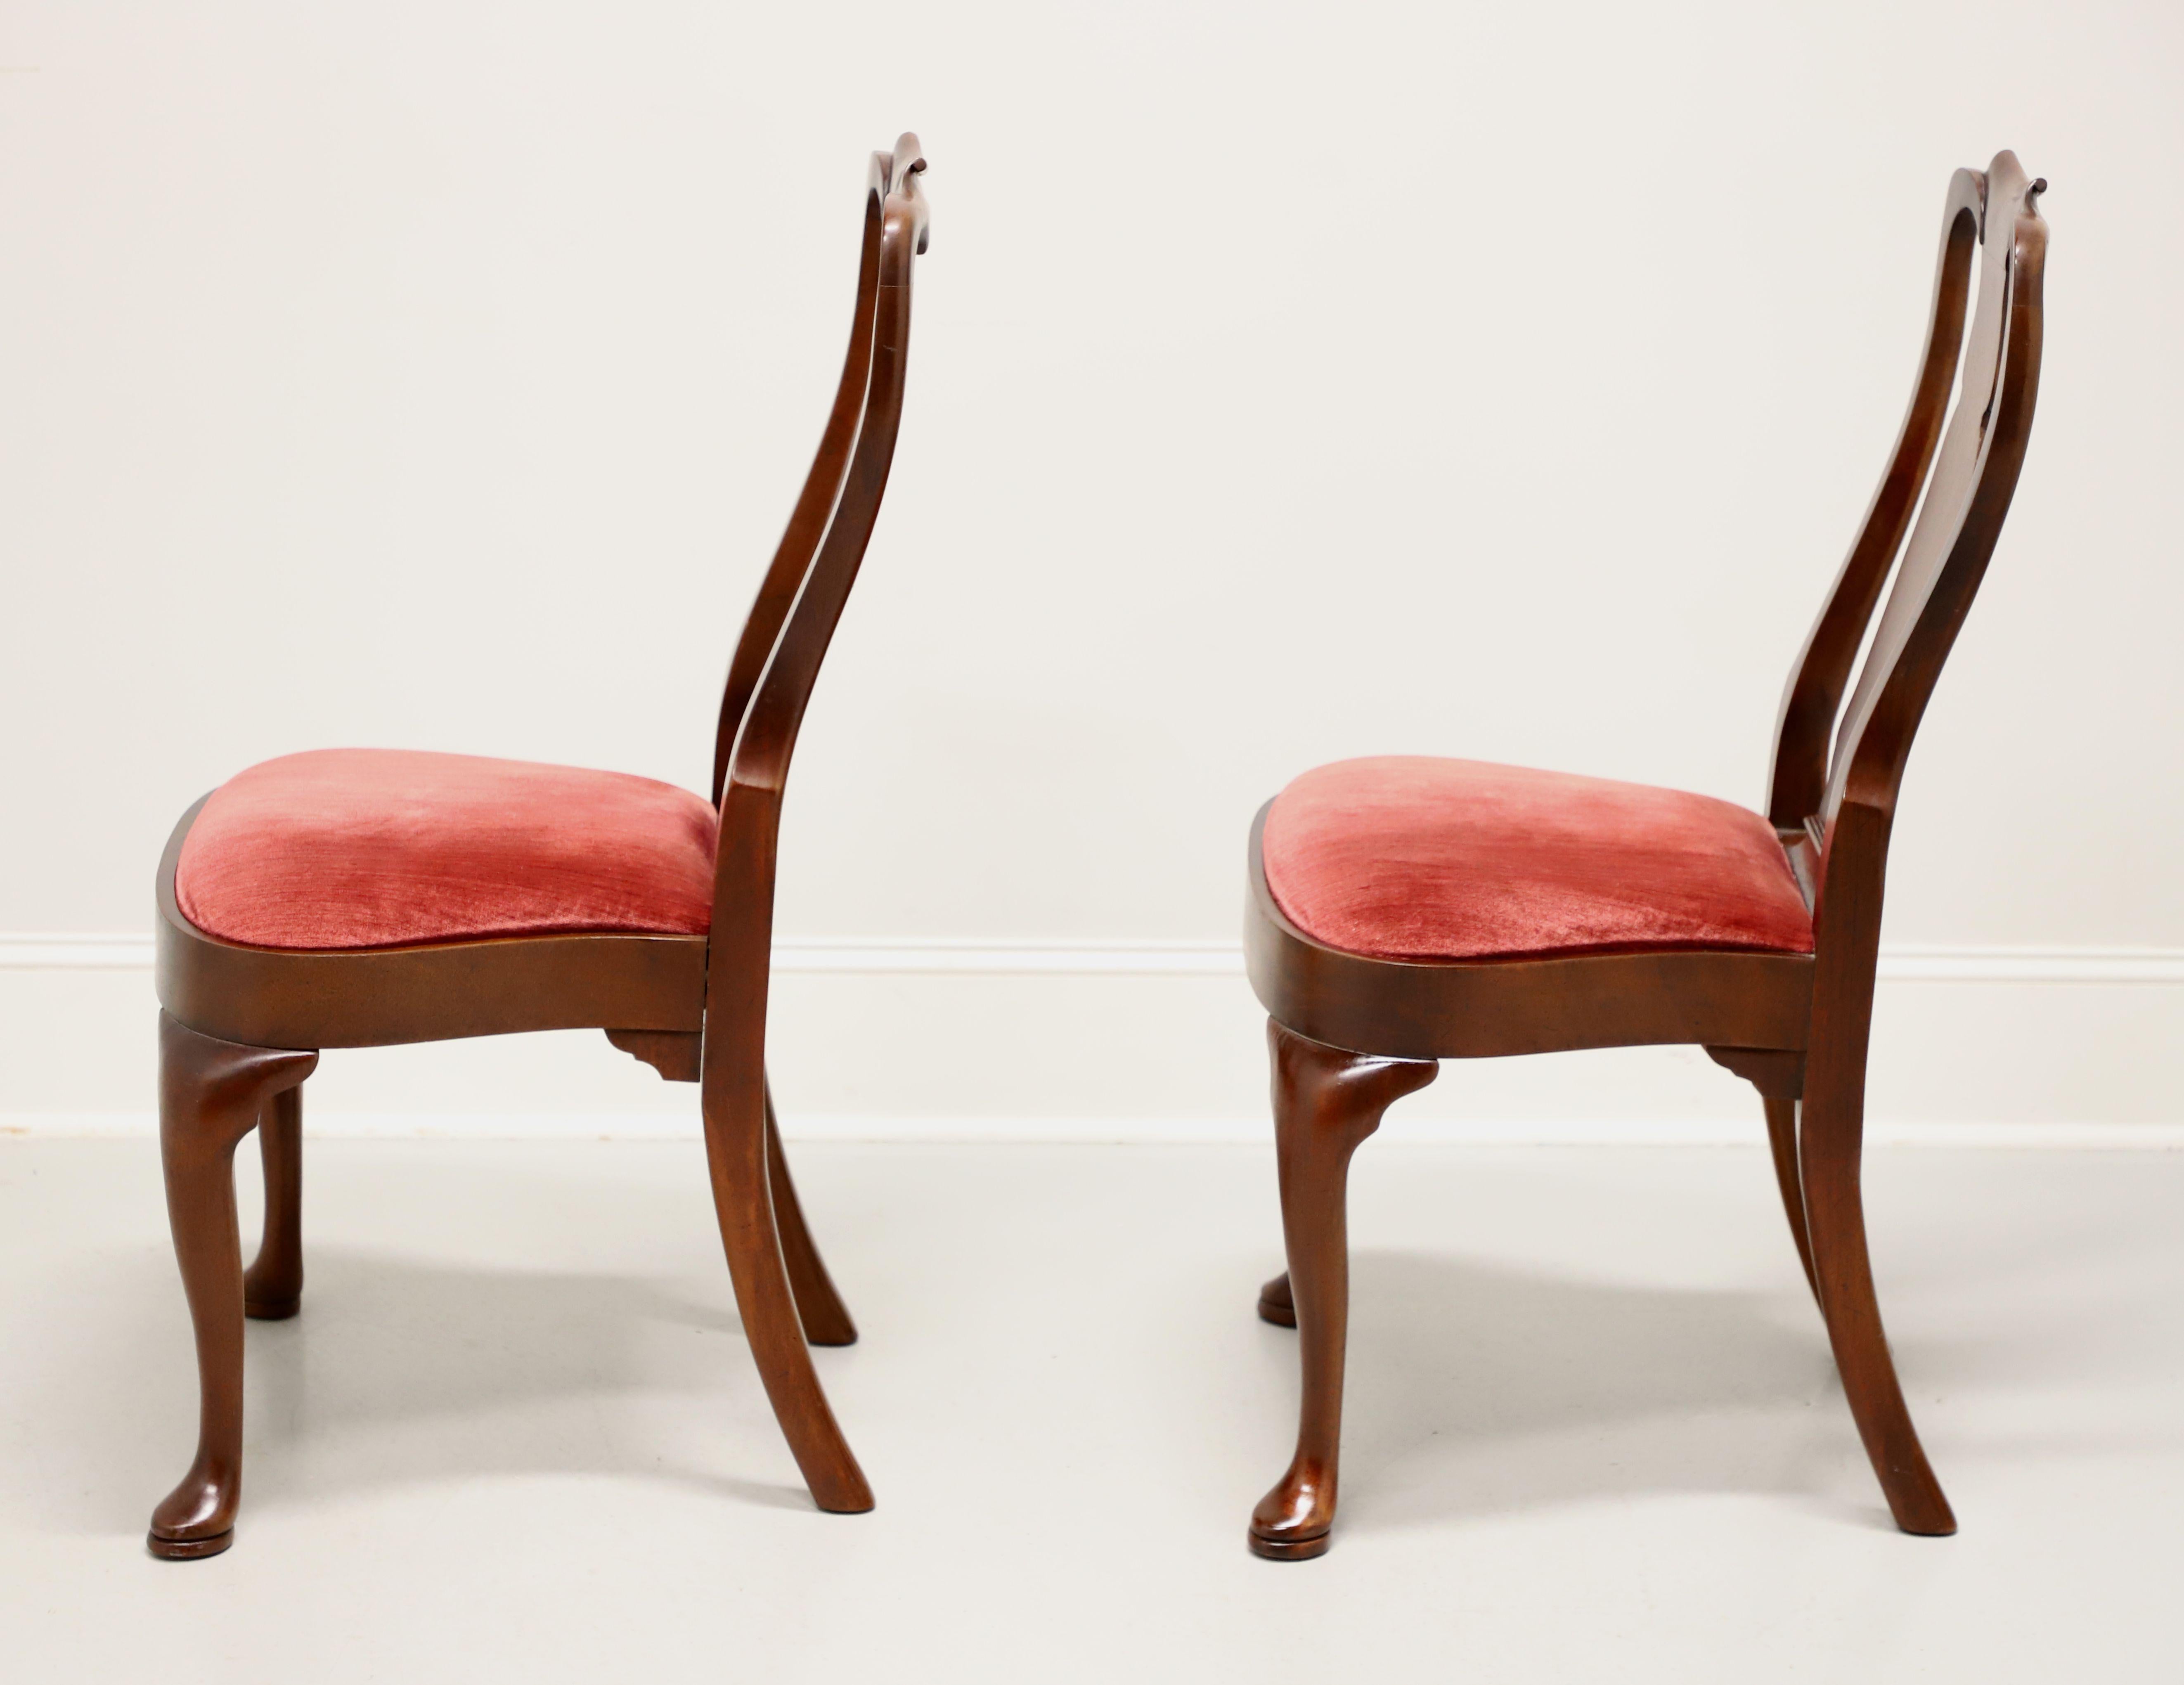 Fabric HICKORY CHAIR Mahogany Queen Anne Dining Side Chairs - Pair C